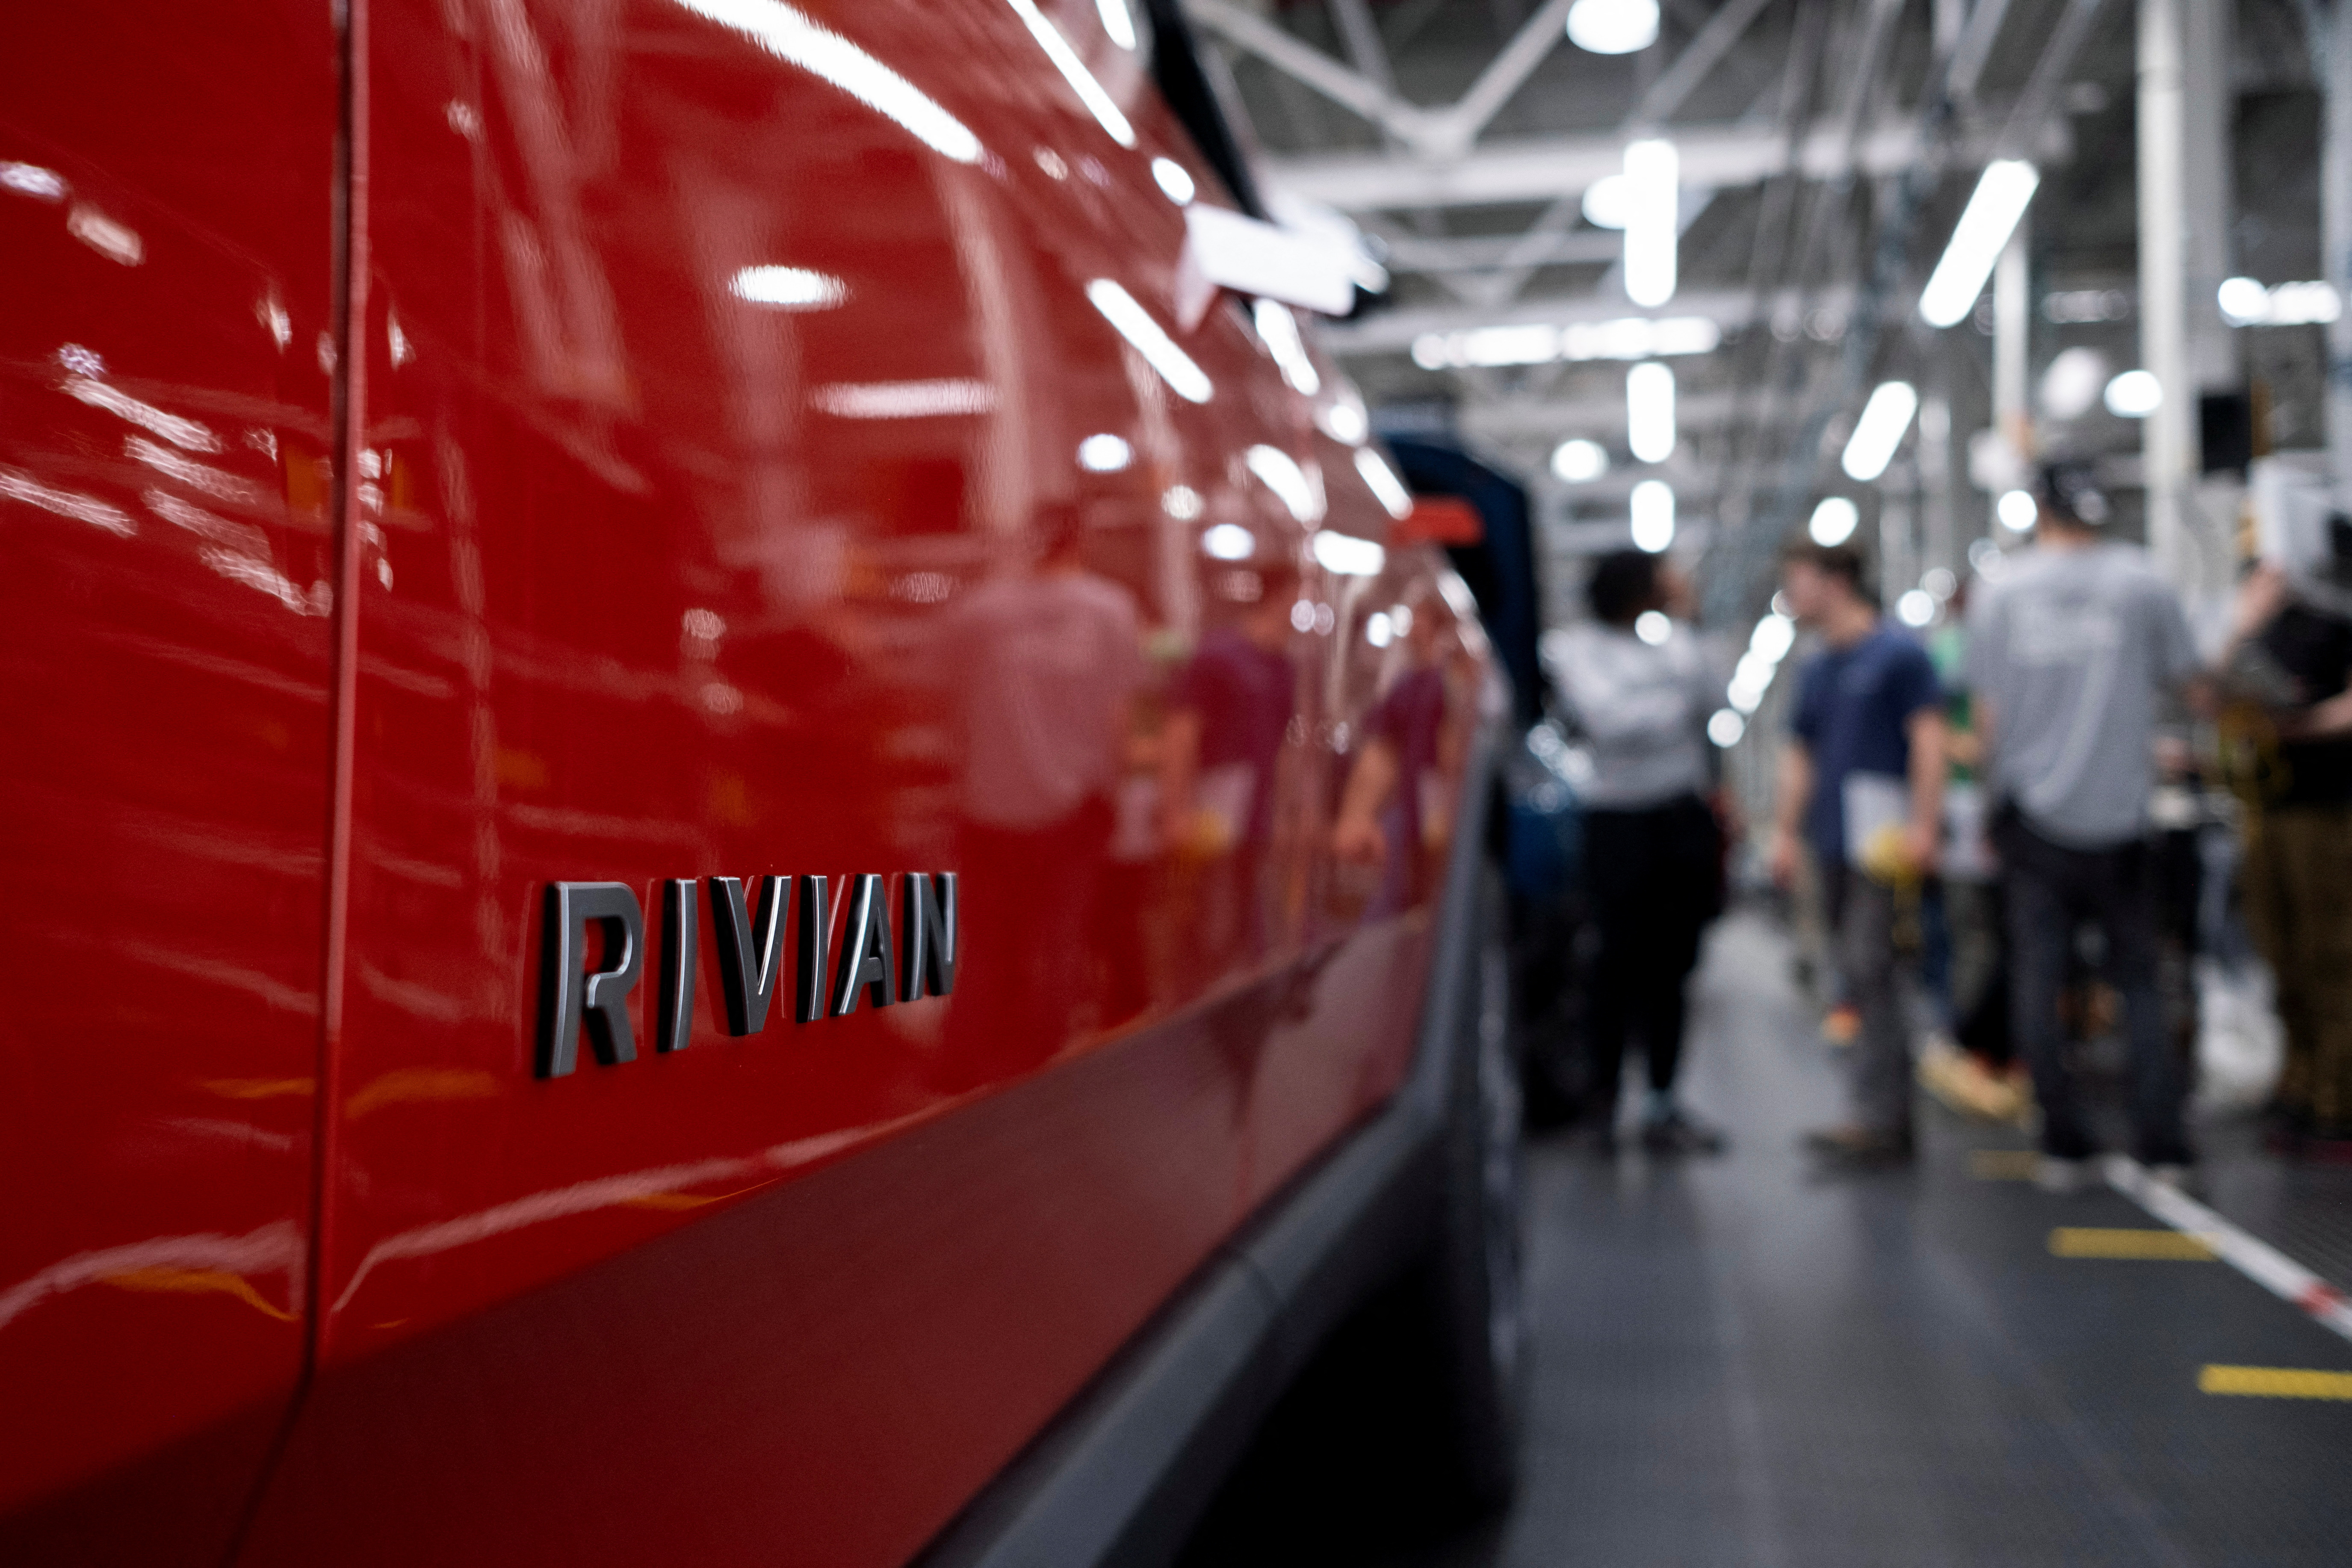 Electric auto maker Rivian's manufacturing facility in Normal